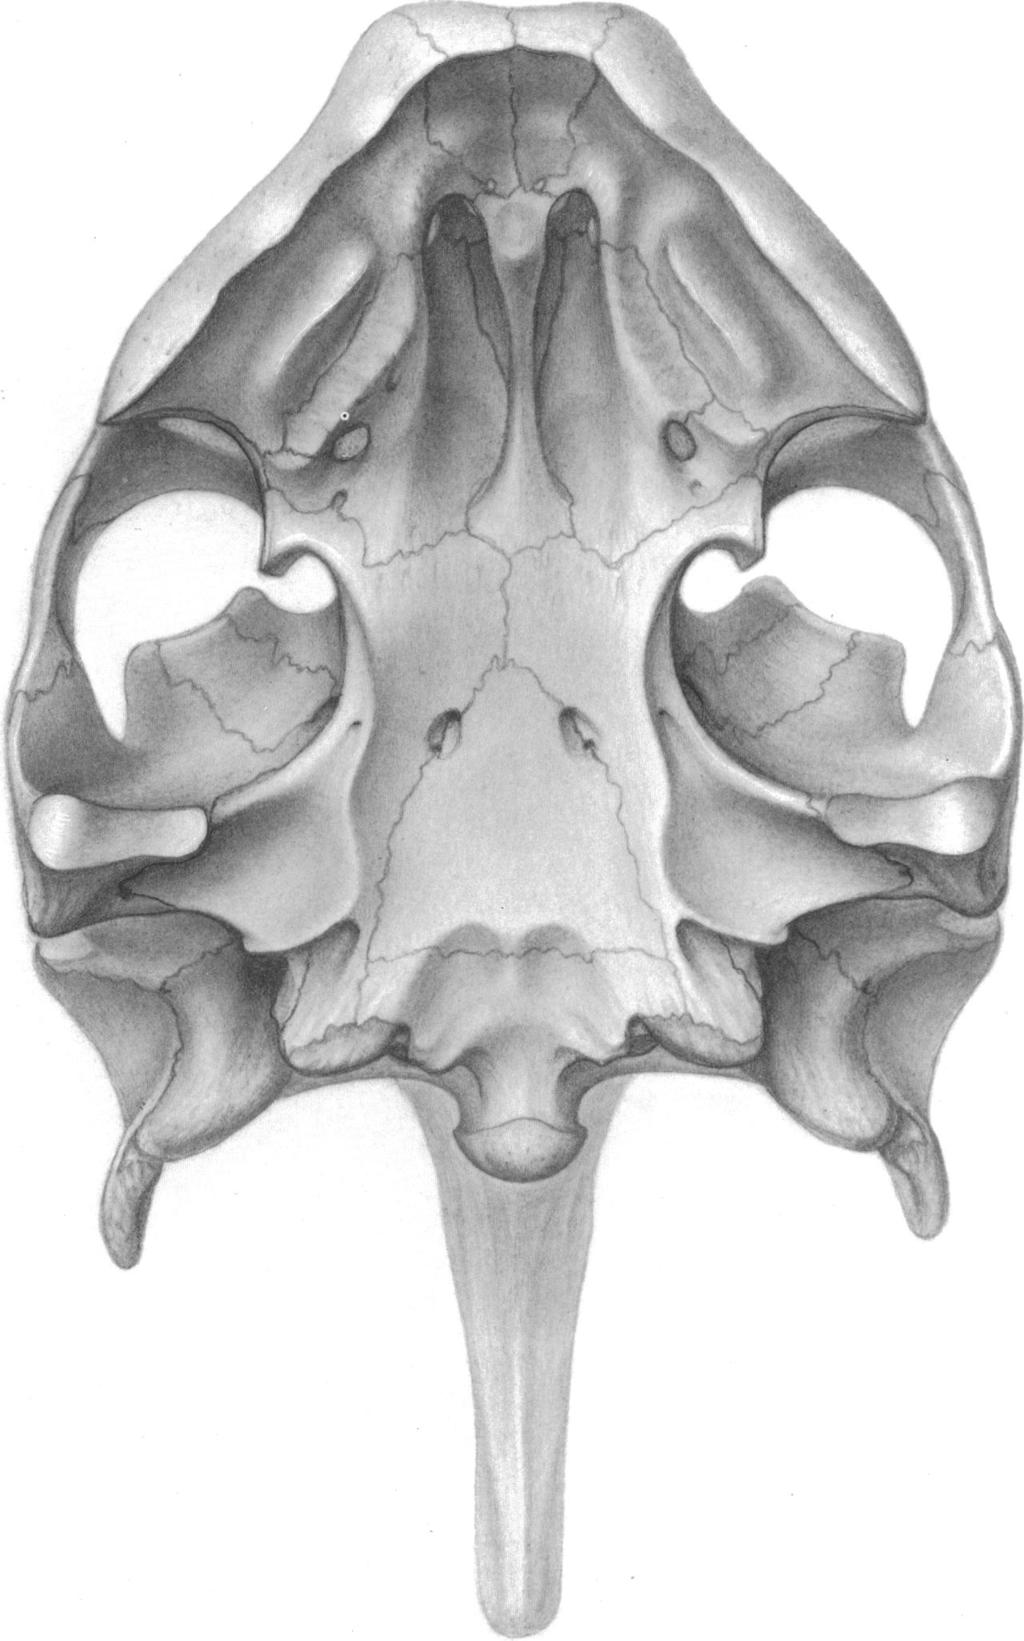 10 AMERICAN MUSEUM NOVITATES NO. 2941 Fig. 5. Skull ofadocus (CCM 60-15) in ventral view. Figure is based primarily on CCM 60-15 with additions from CM 3428.